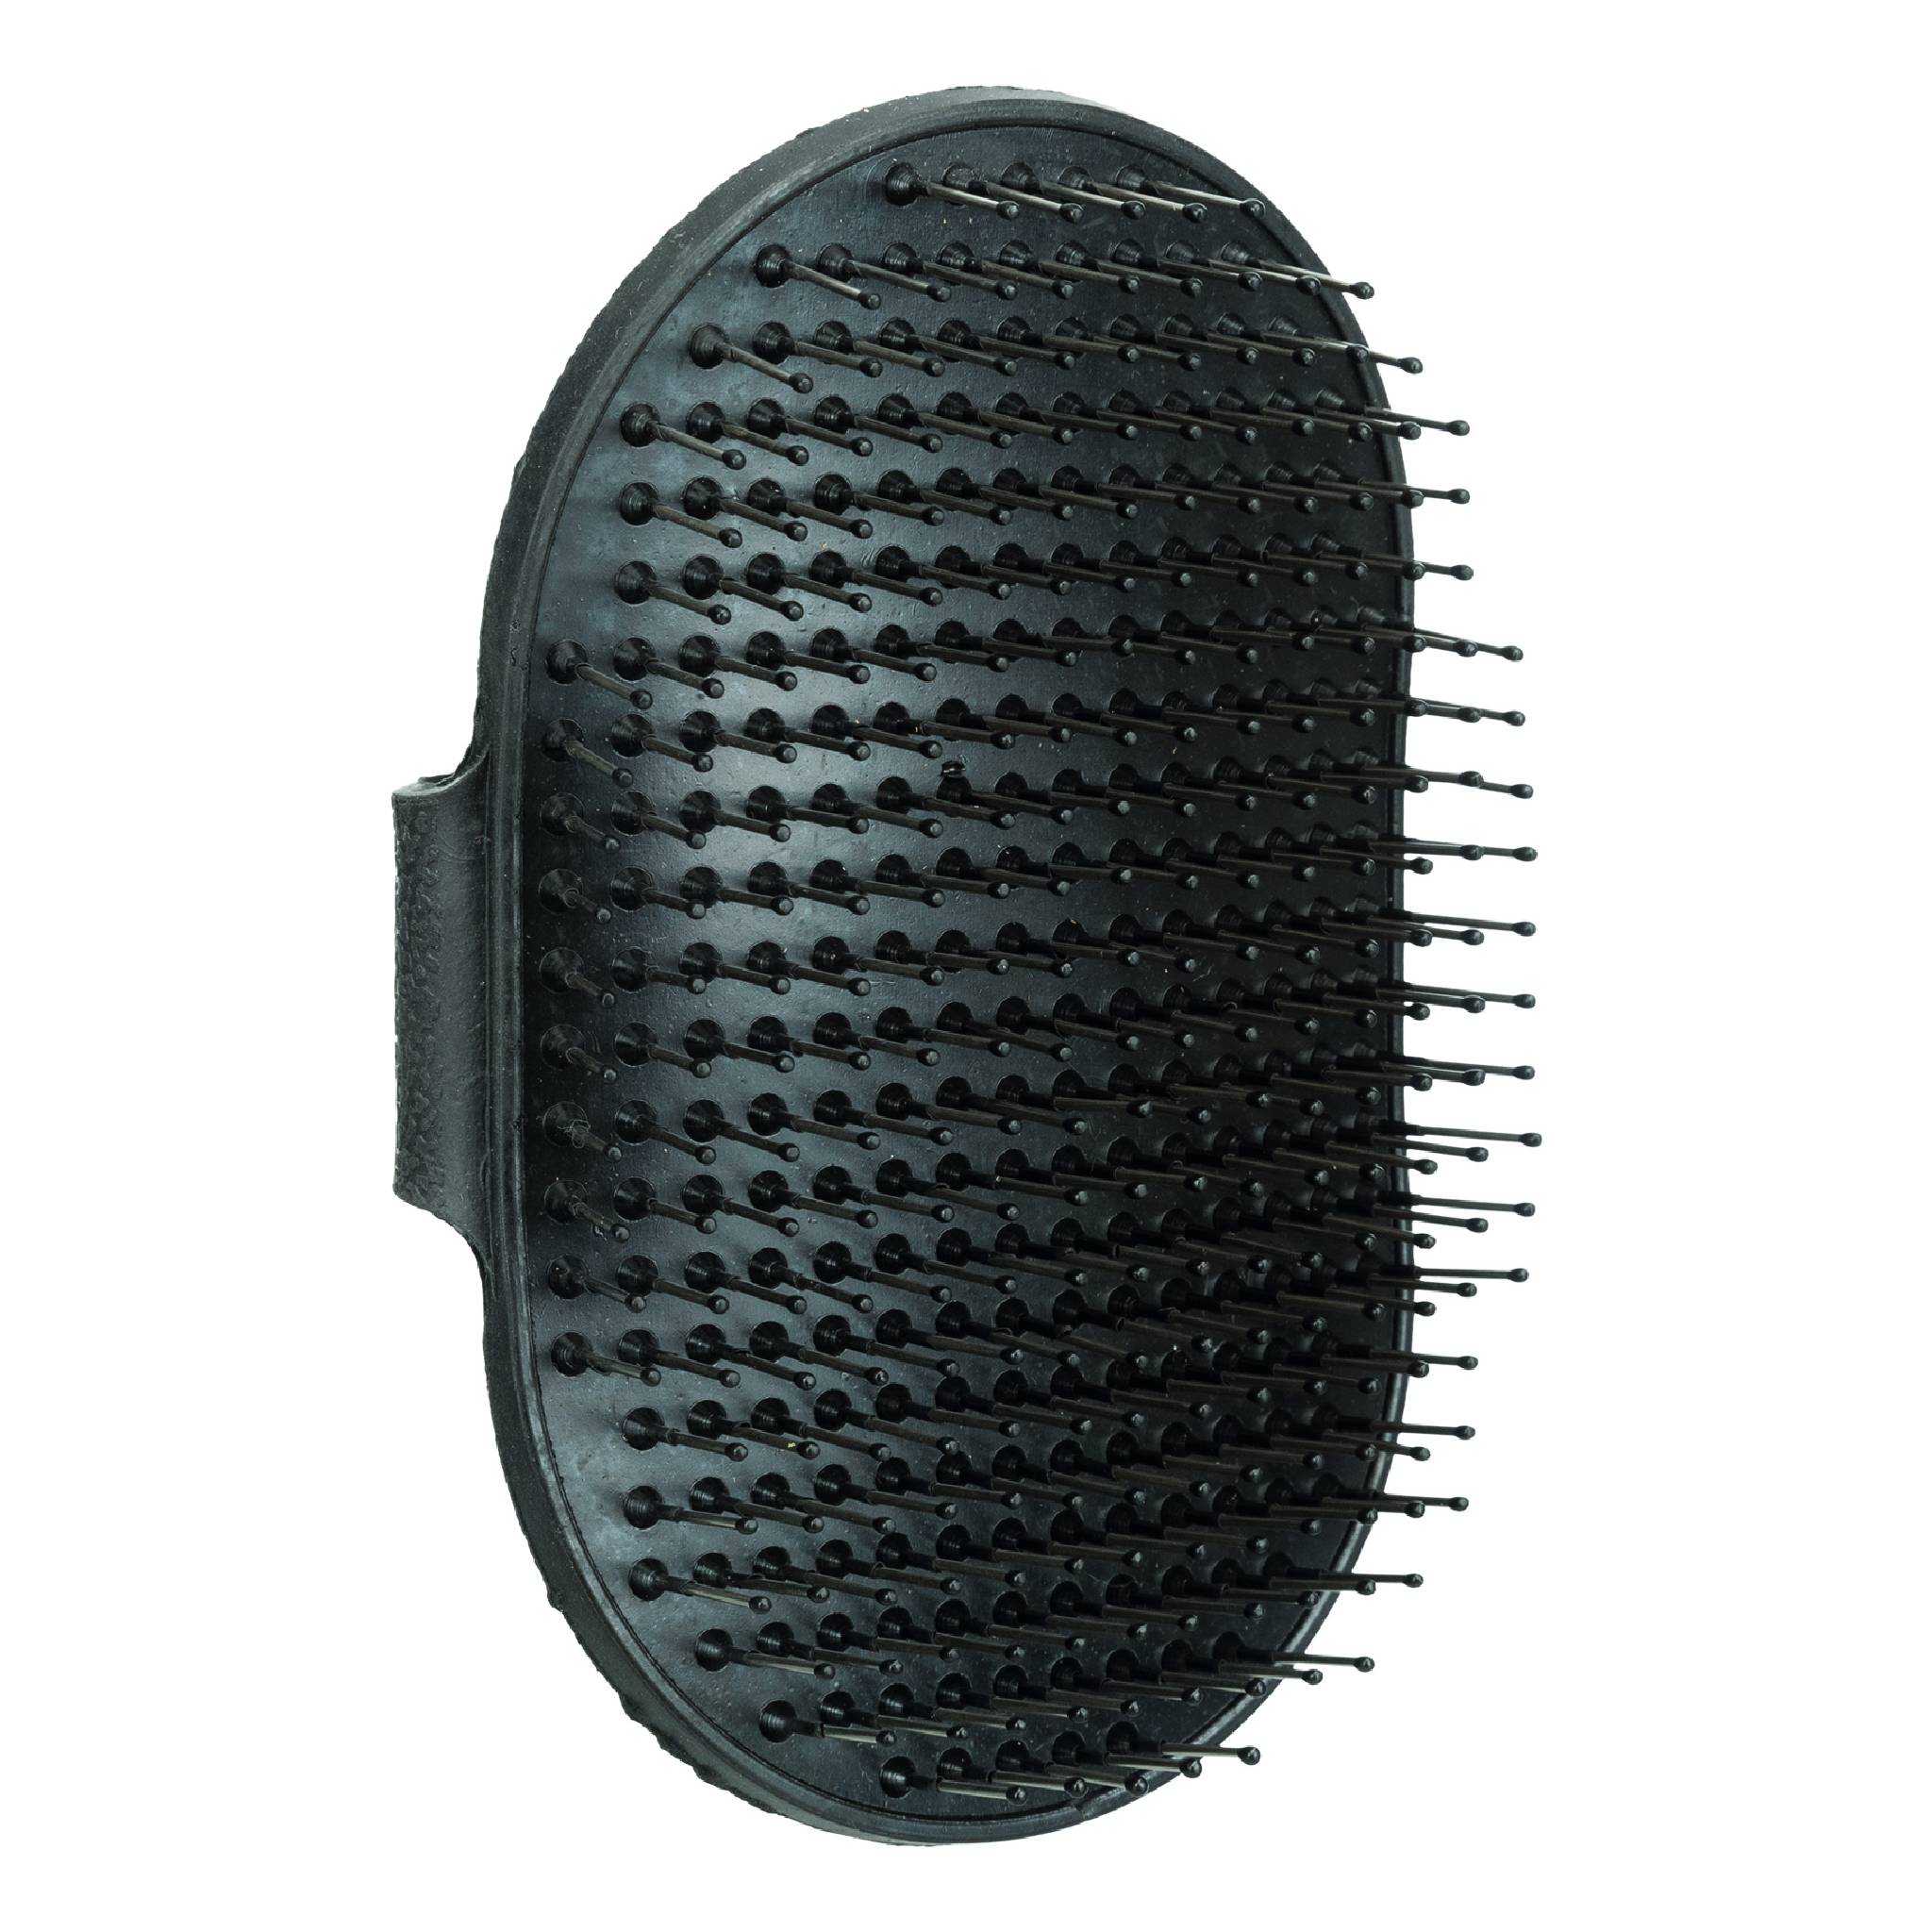 Trixie Care Brush with Wire Bristles